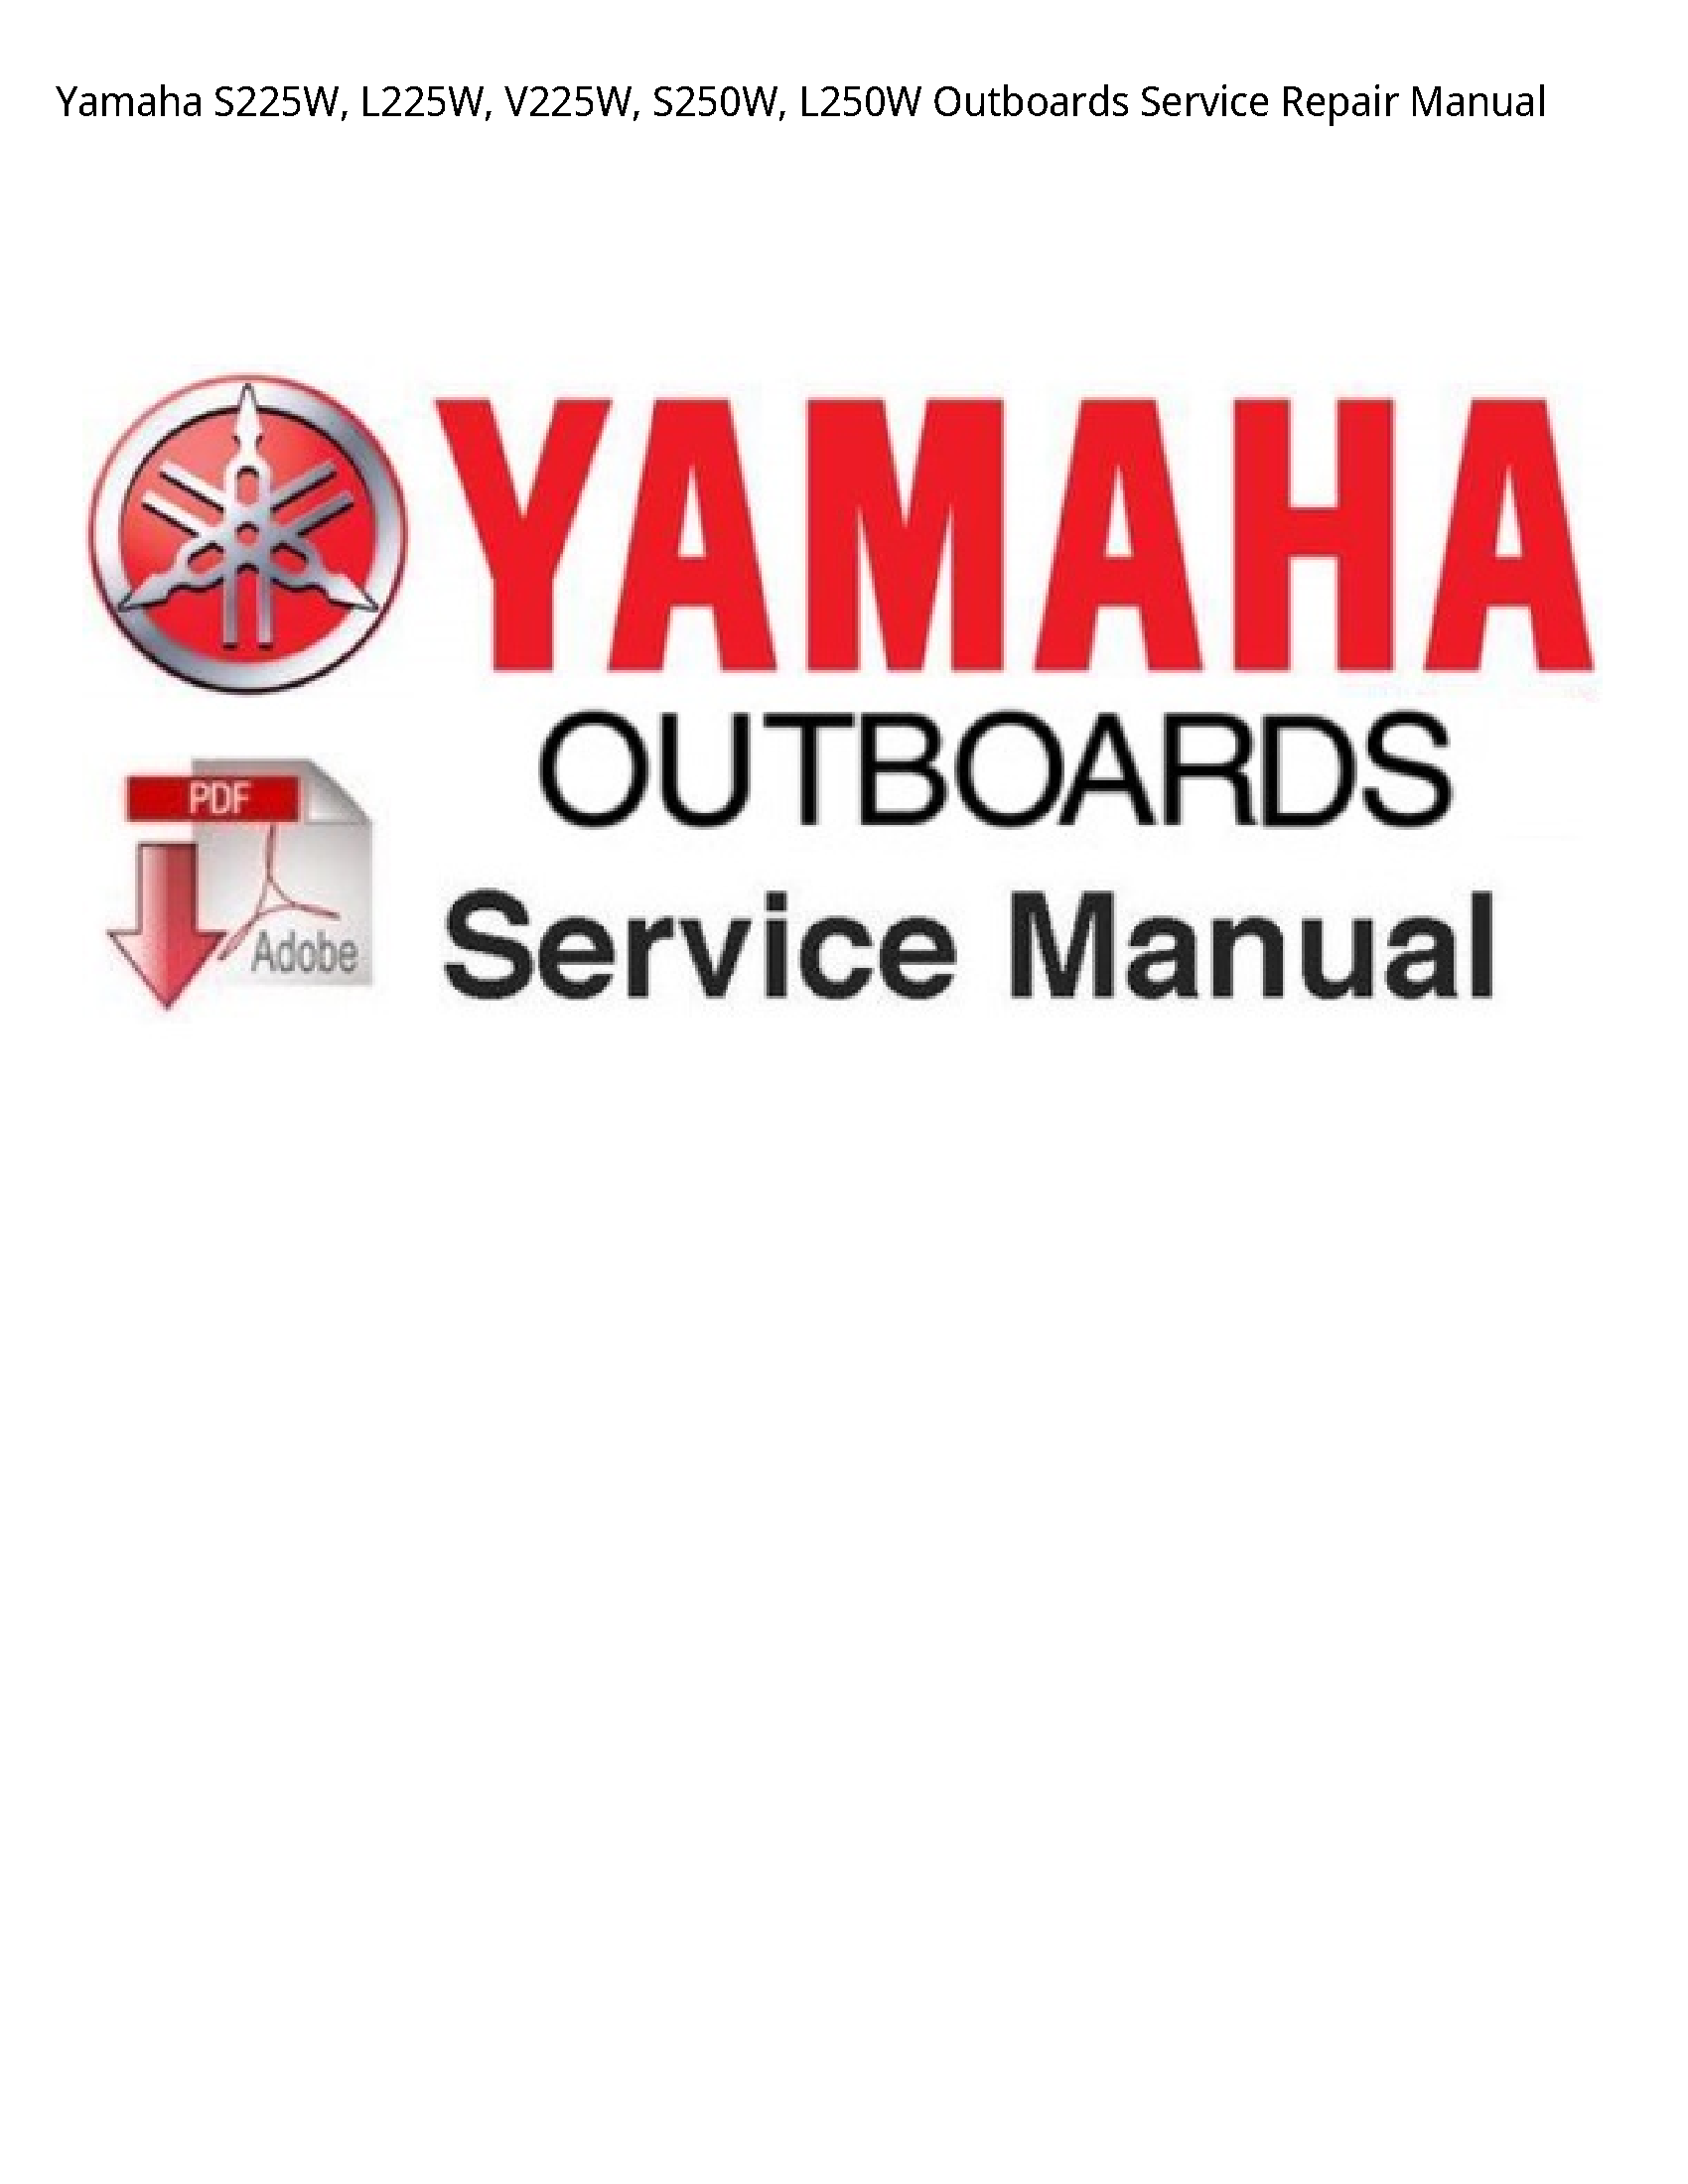 Yamaha S225W Outboards manual